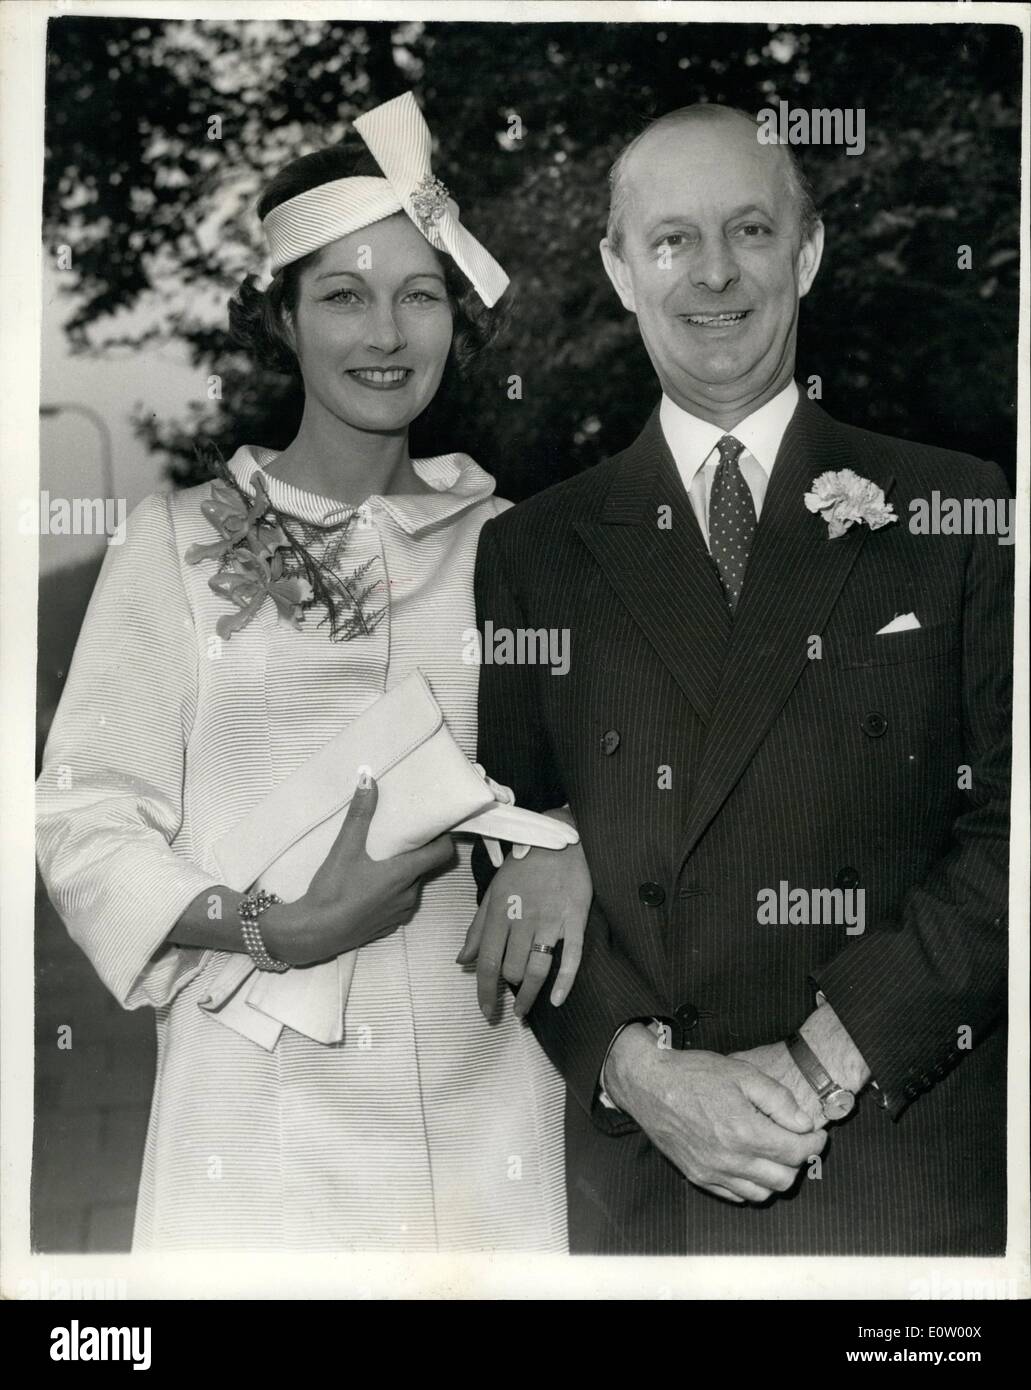 Oct. 10, 1960 - Viscount Astor weds.: 53-year old Viscount Astor of Cliveden, and 29-year old Miss Bronwen Pugh, the London model and former television announcer, were married today at Hampstead Register Office. They announced their engagement last night. This is Viscount Aster's third marriage. The bride is the daughter of sir Alun Pugh, the country court judge, and Lady Pugh, of Pilgrim's Lane, Hampstead. Photo shows the bride and groom after the ceremony today. Stock Photo